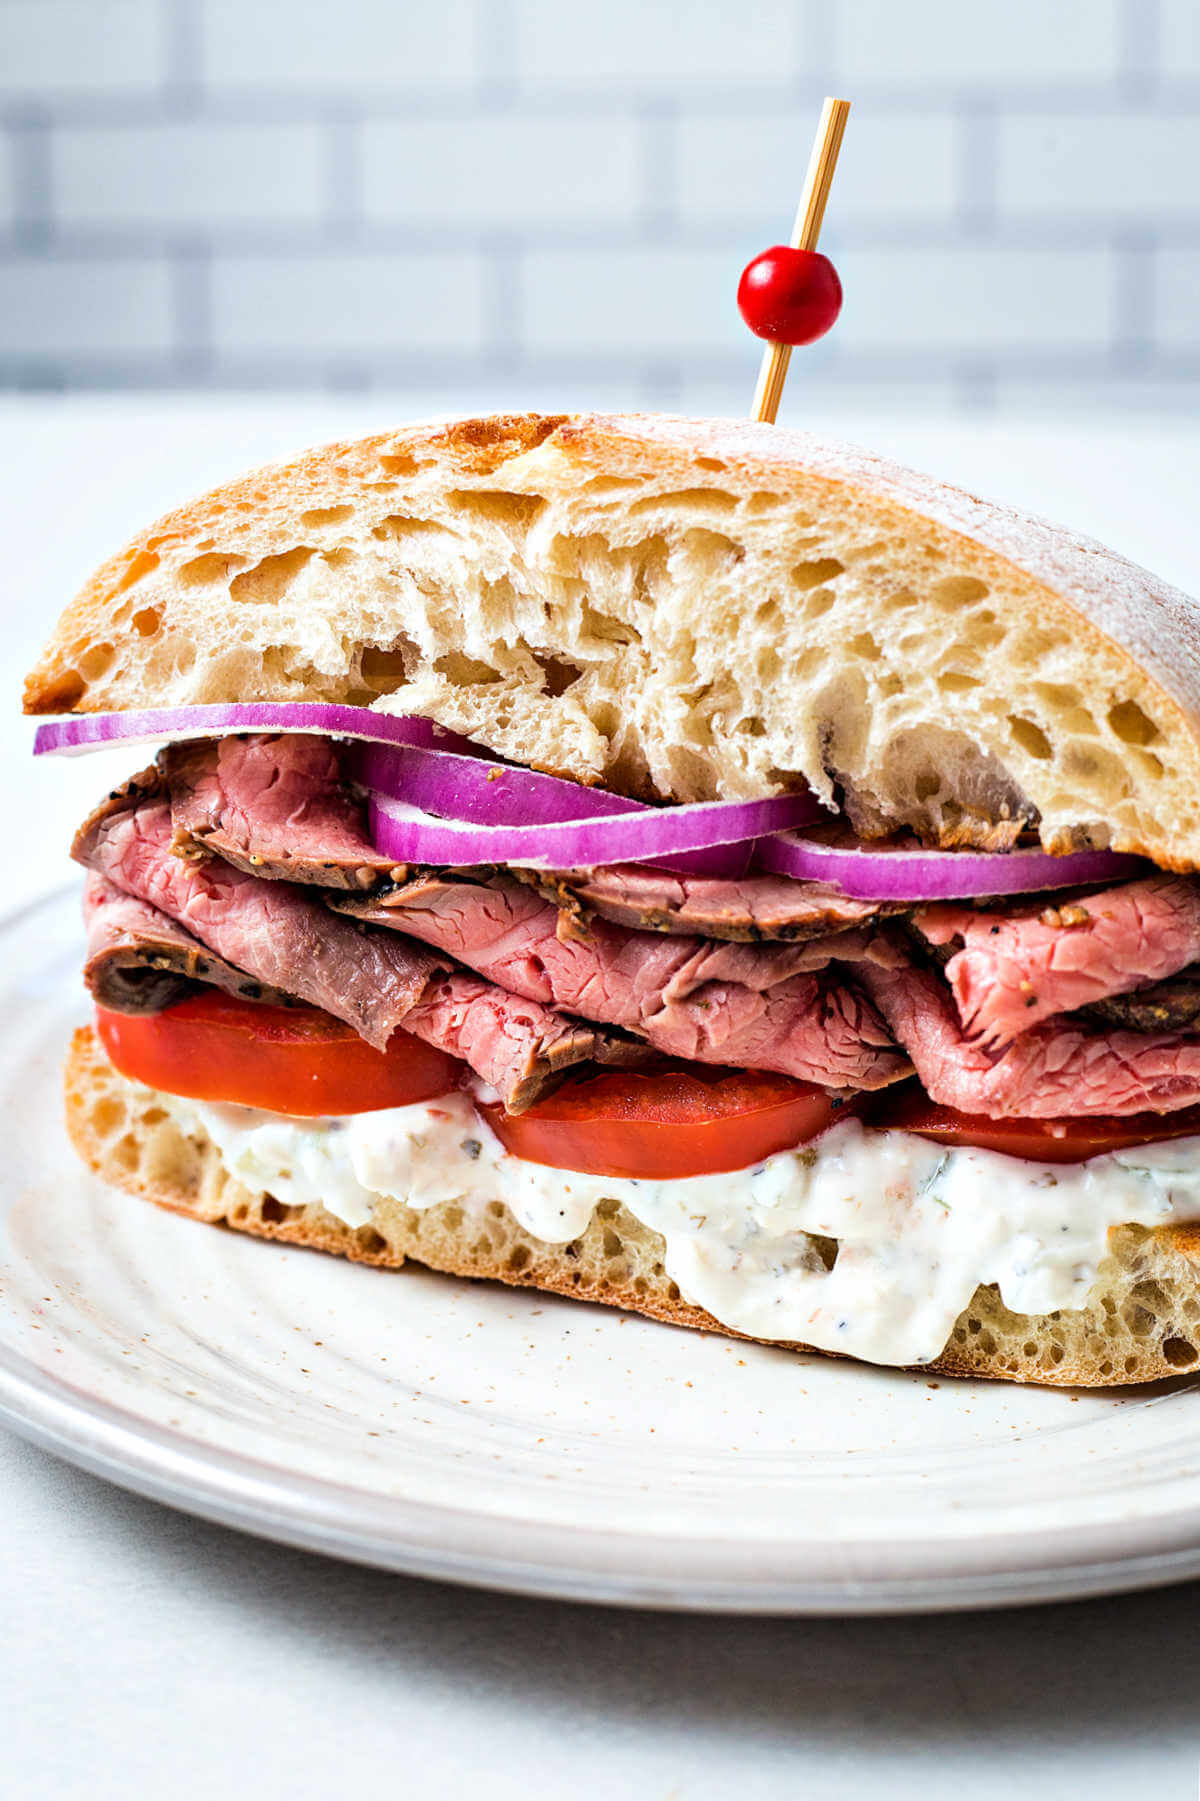 a steak sandwich on a ciabatta bun with tomatoes and red onions.